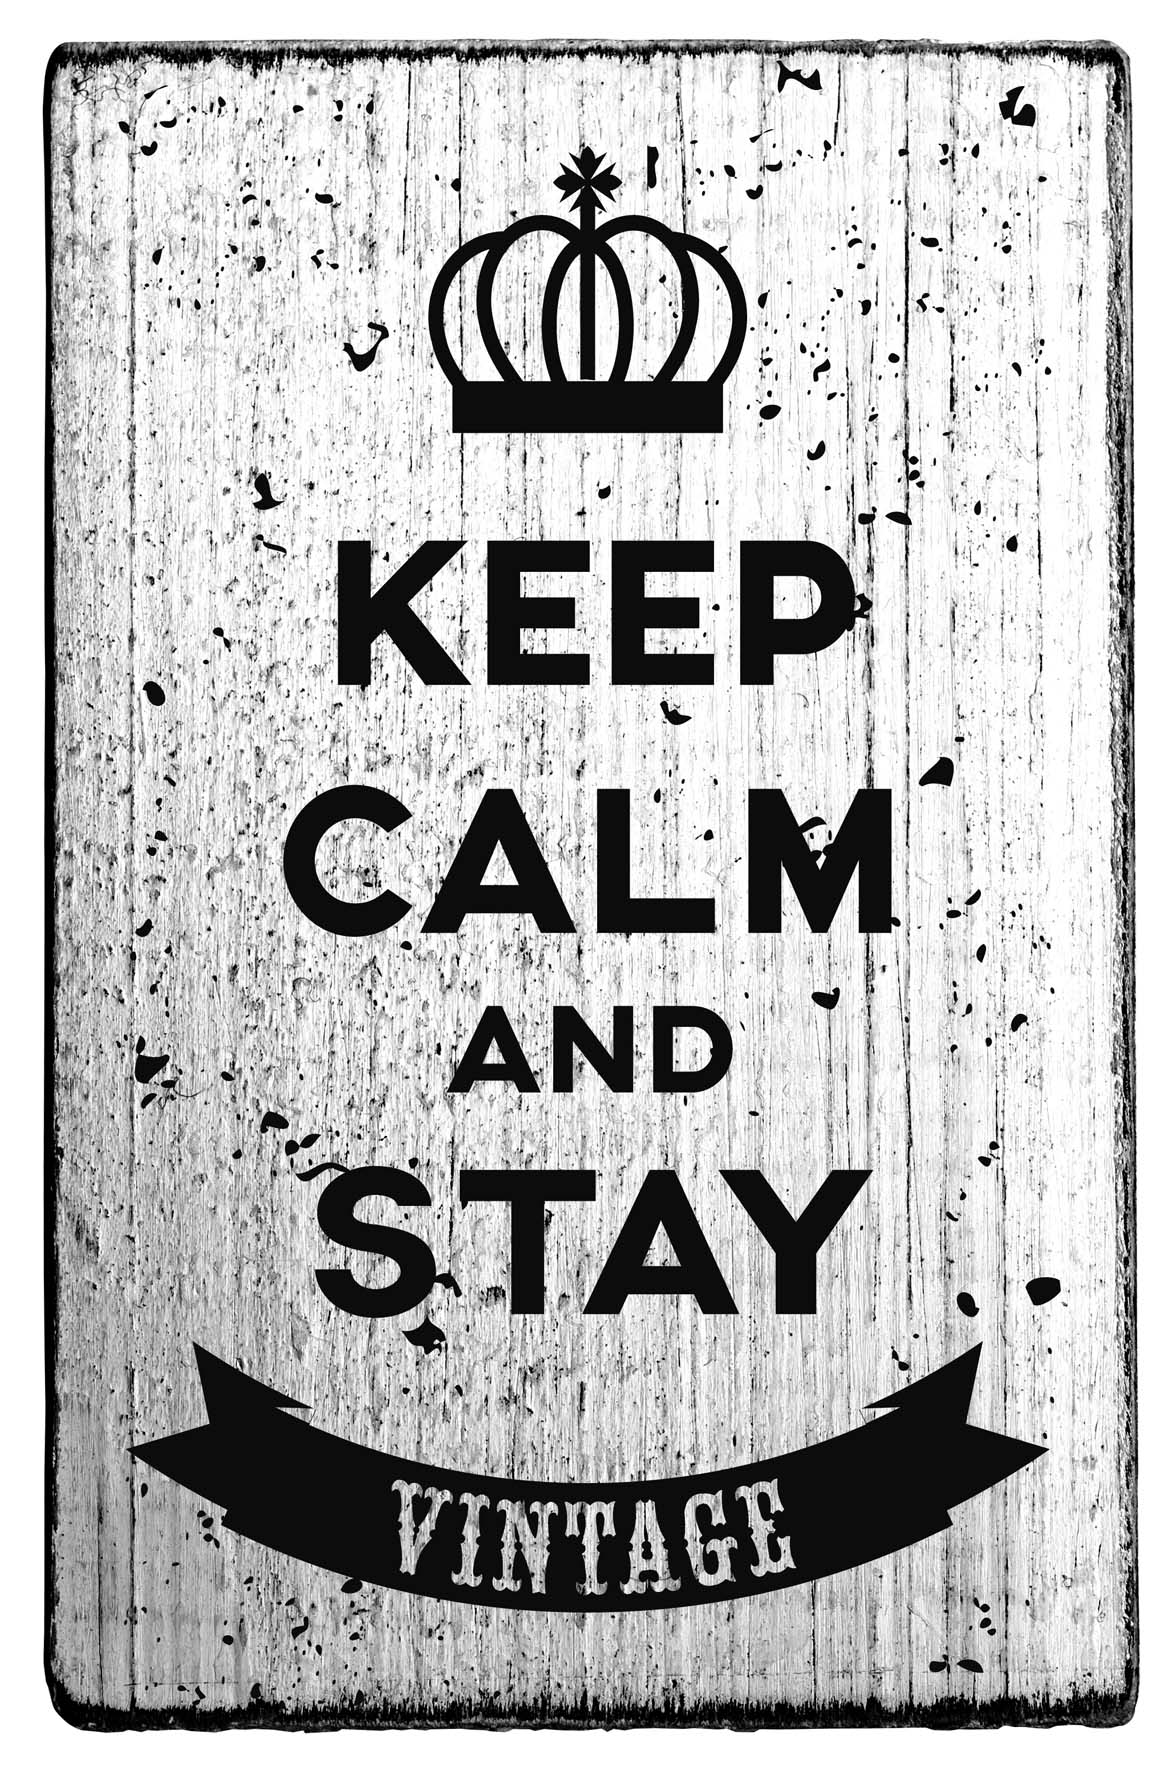 Vintage - Keep calm and stay - V-01004